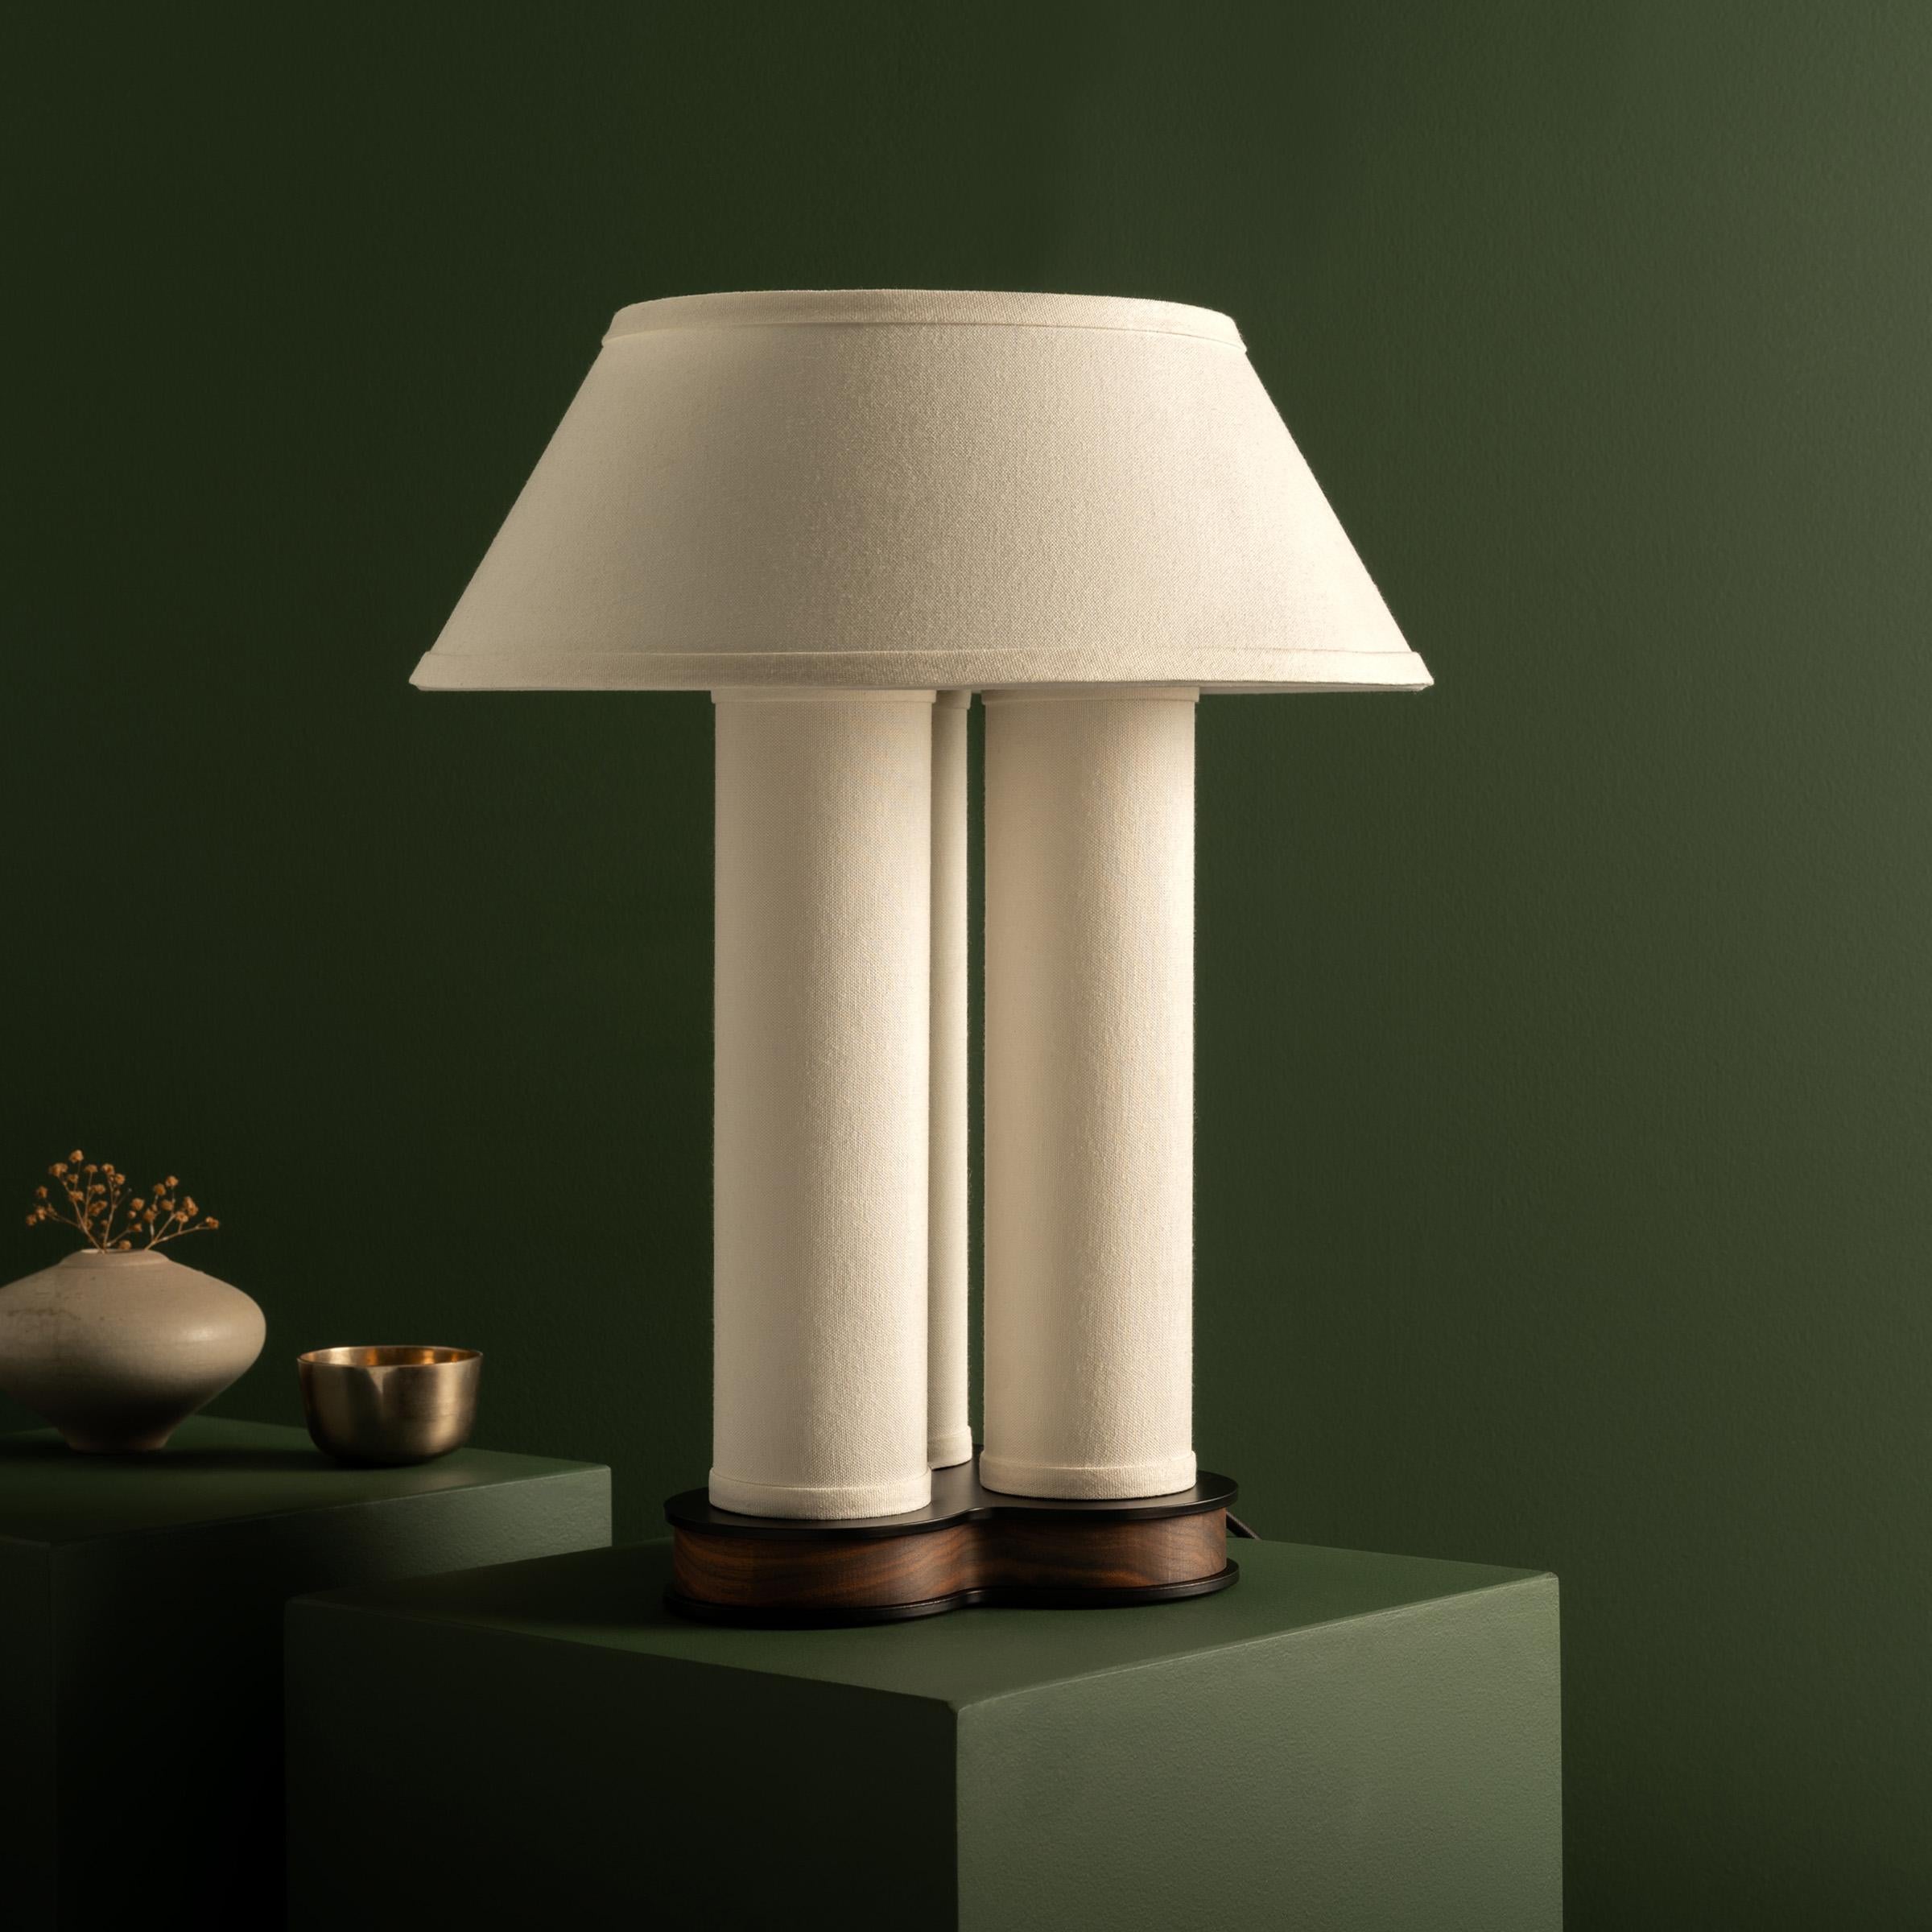 Neoclassical Pillaret Trio 18in Table Lamp by Studio Dunn For Sale